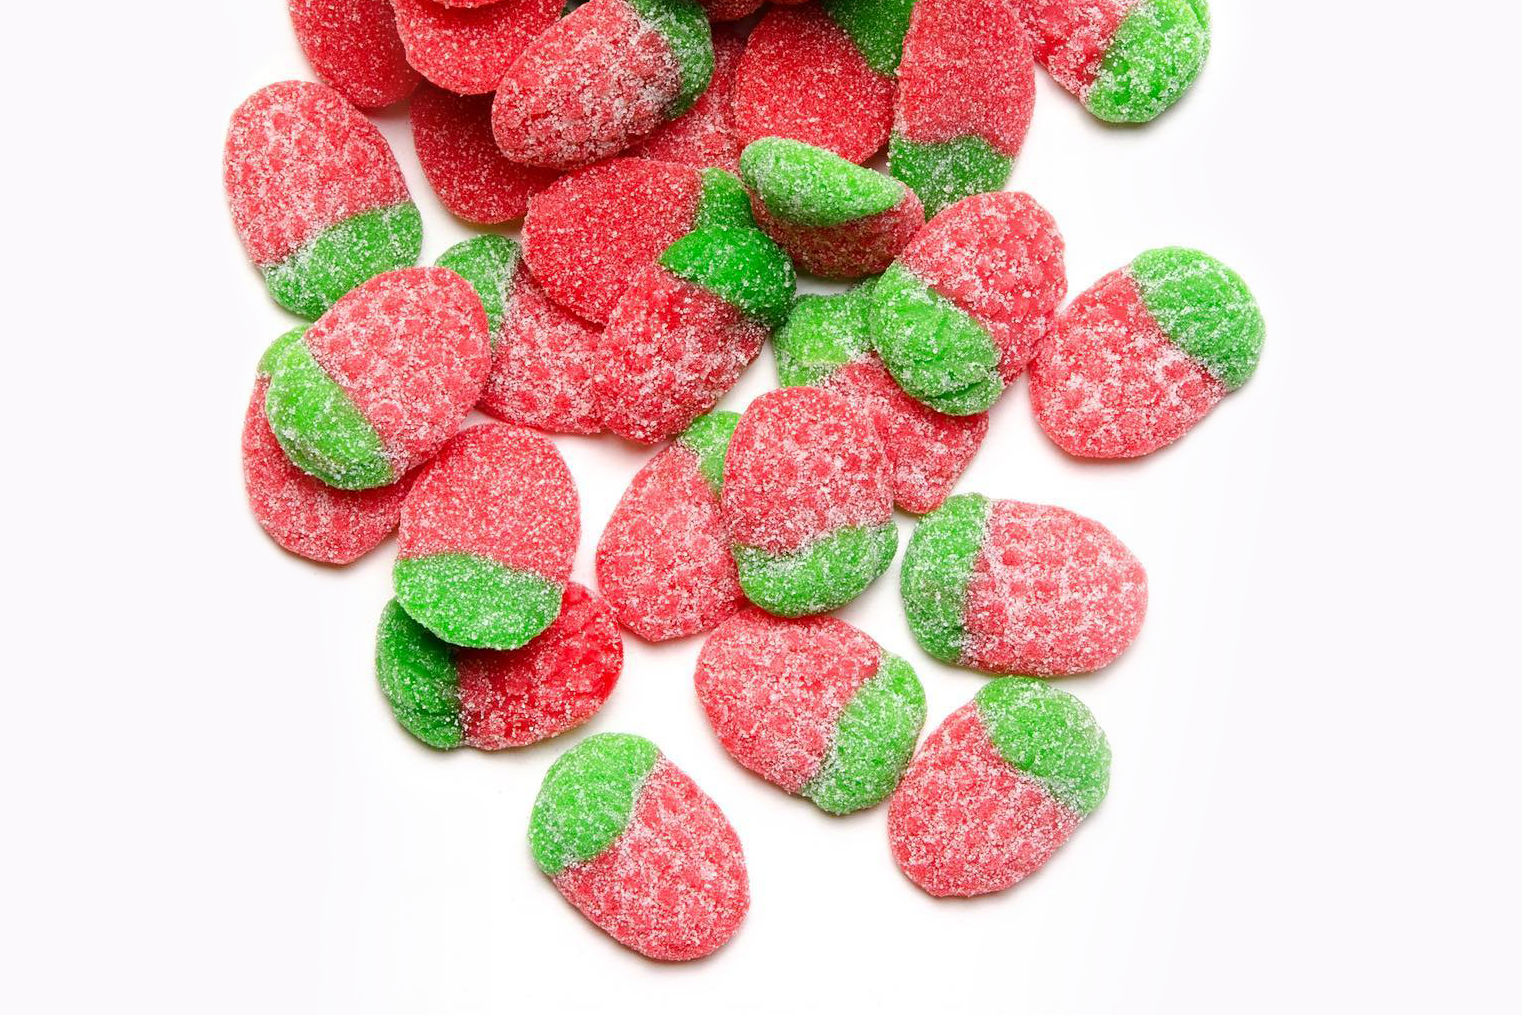 https://www.candyclub.com/blog/wp-content/uploads/2019/08/Sourest-Candy_Sour-Strawberries.png